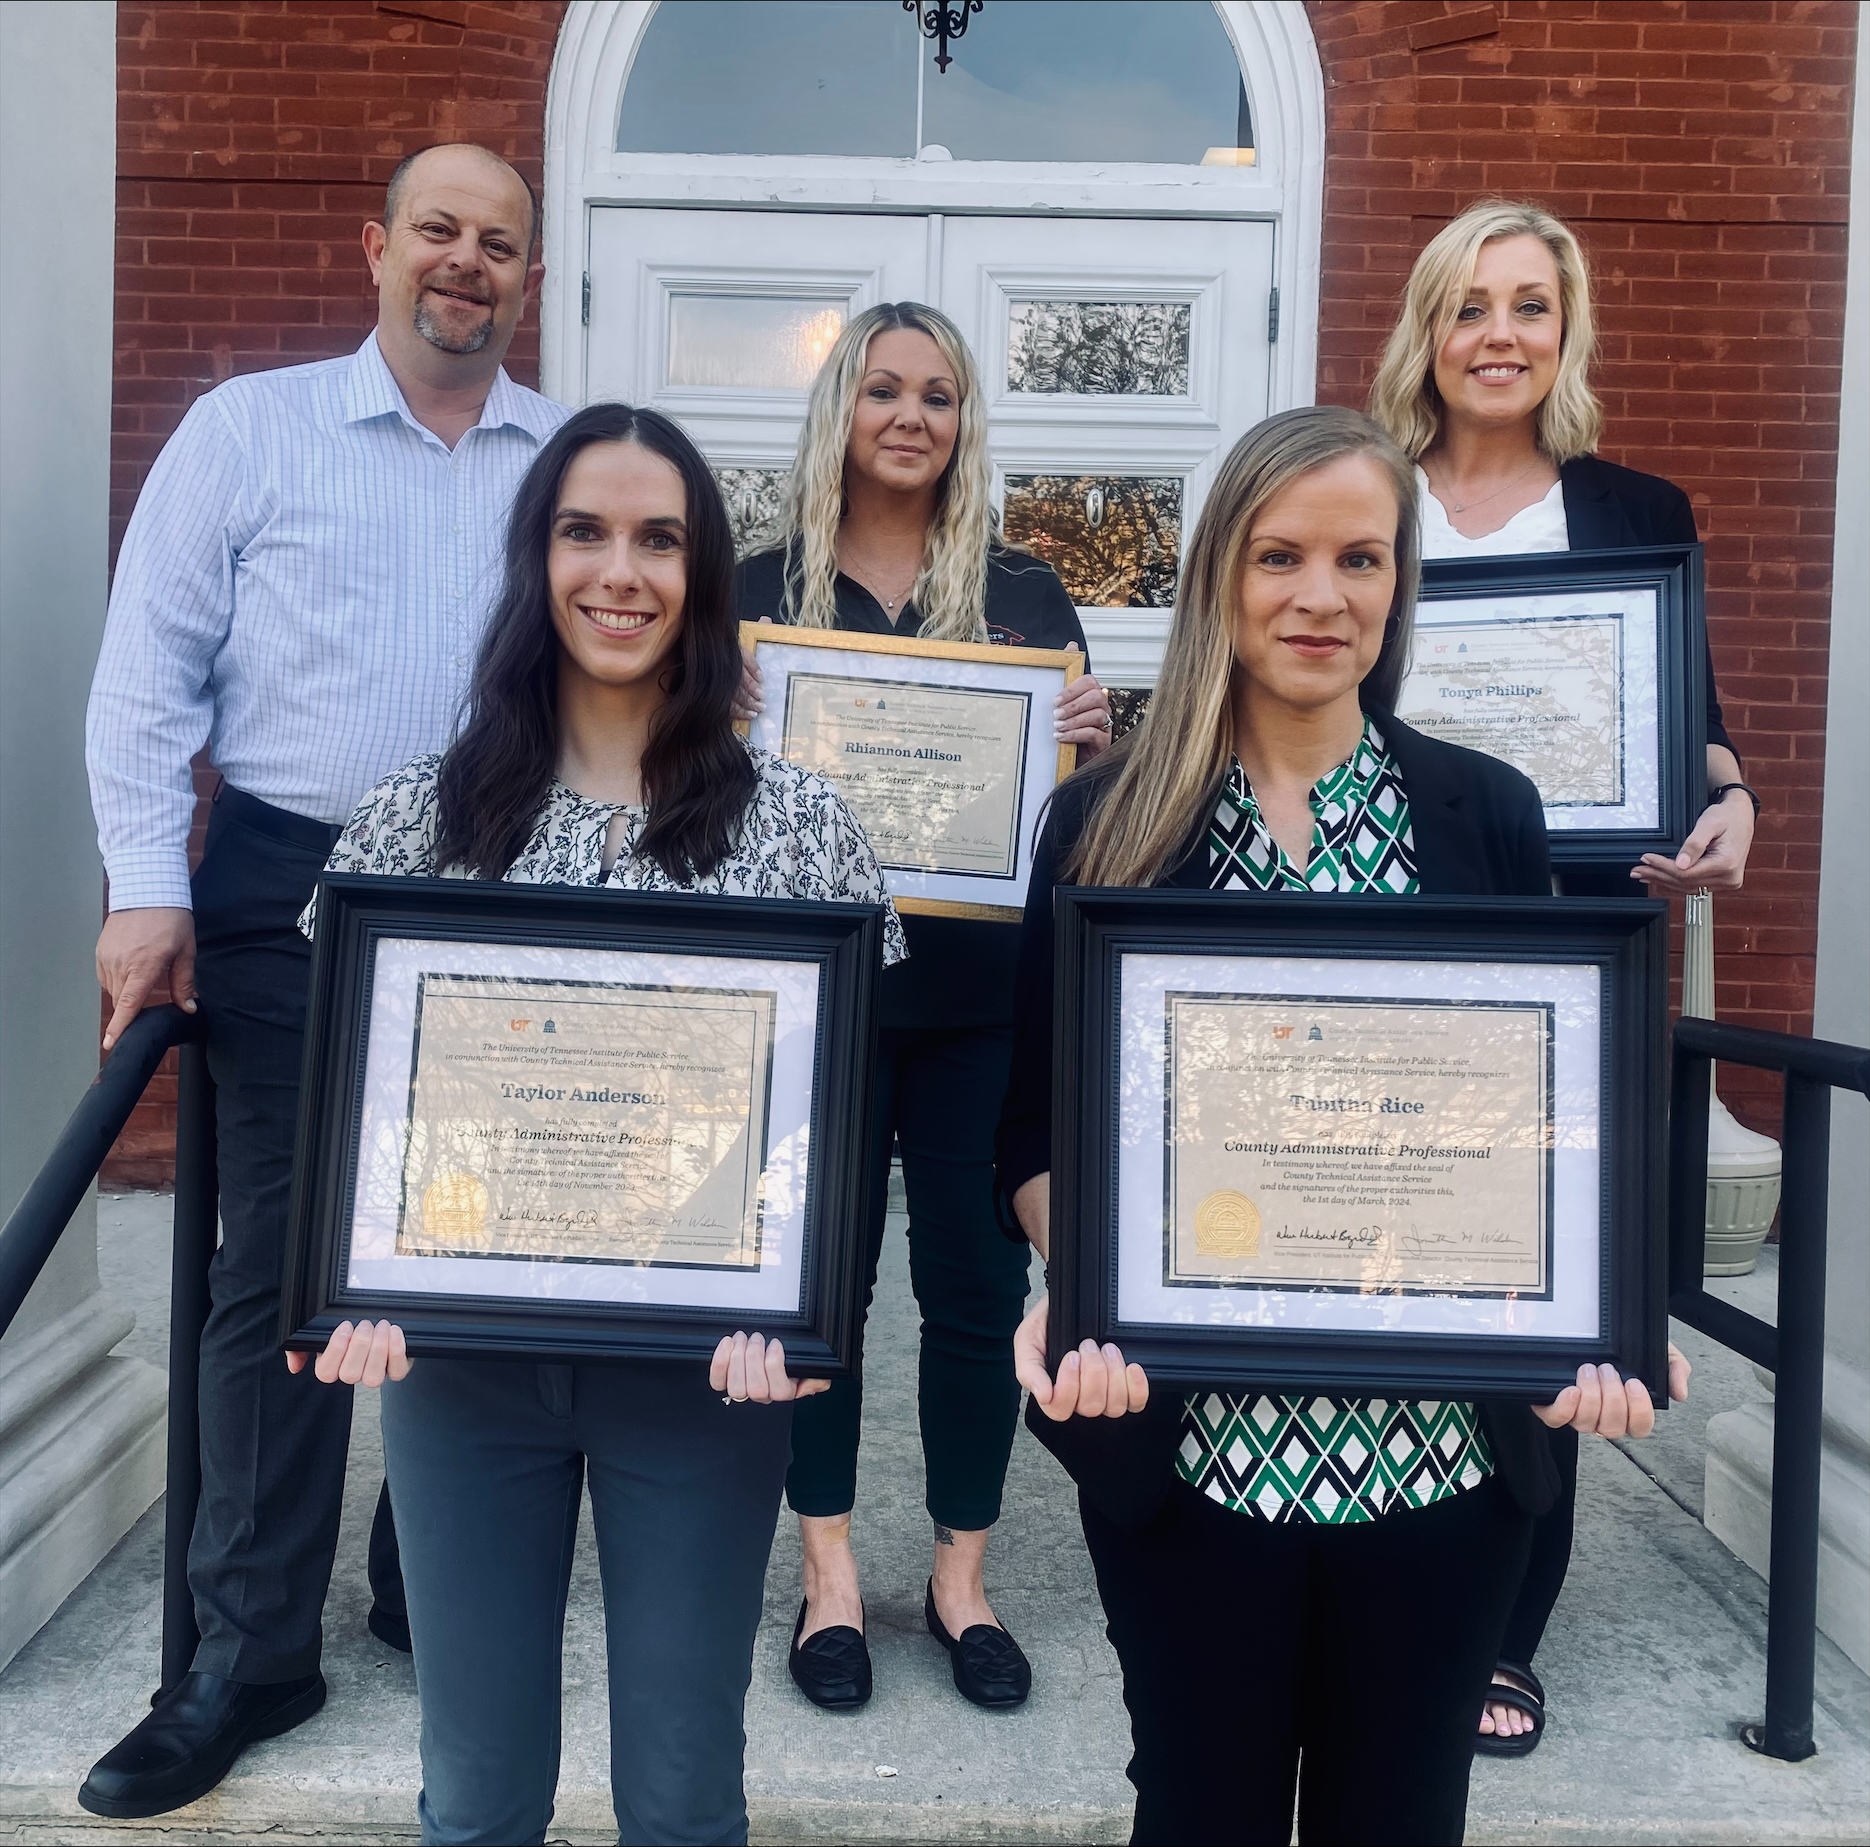 The image shows a group of five individuals standing on steps in front of a building with a red brick facade and white-framed windows. Four are holding a framed certificate indicating their completion of the County Administrative Professional program.